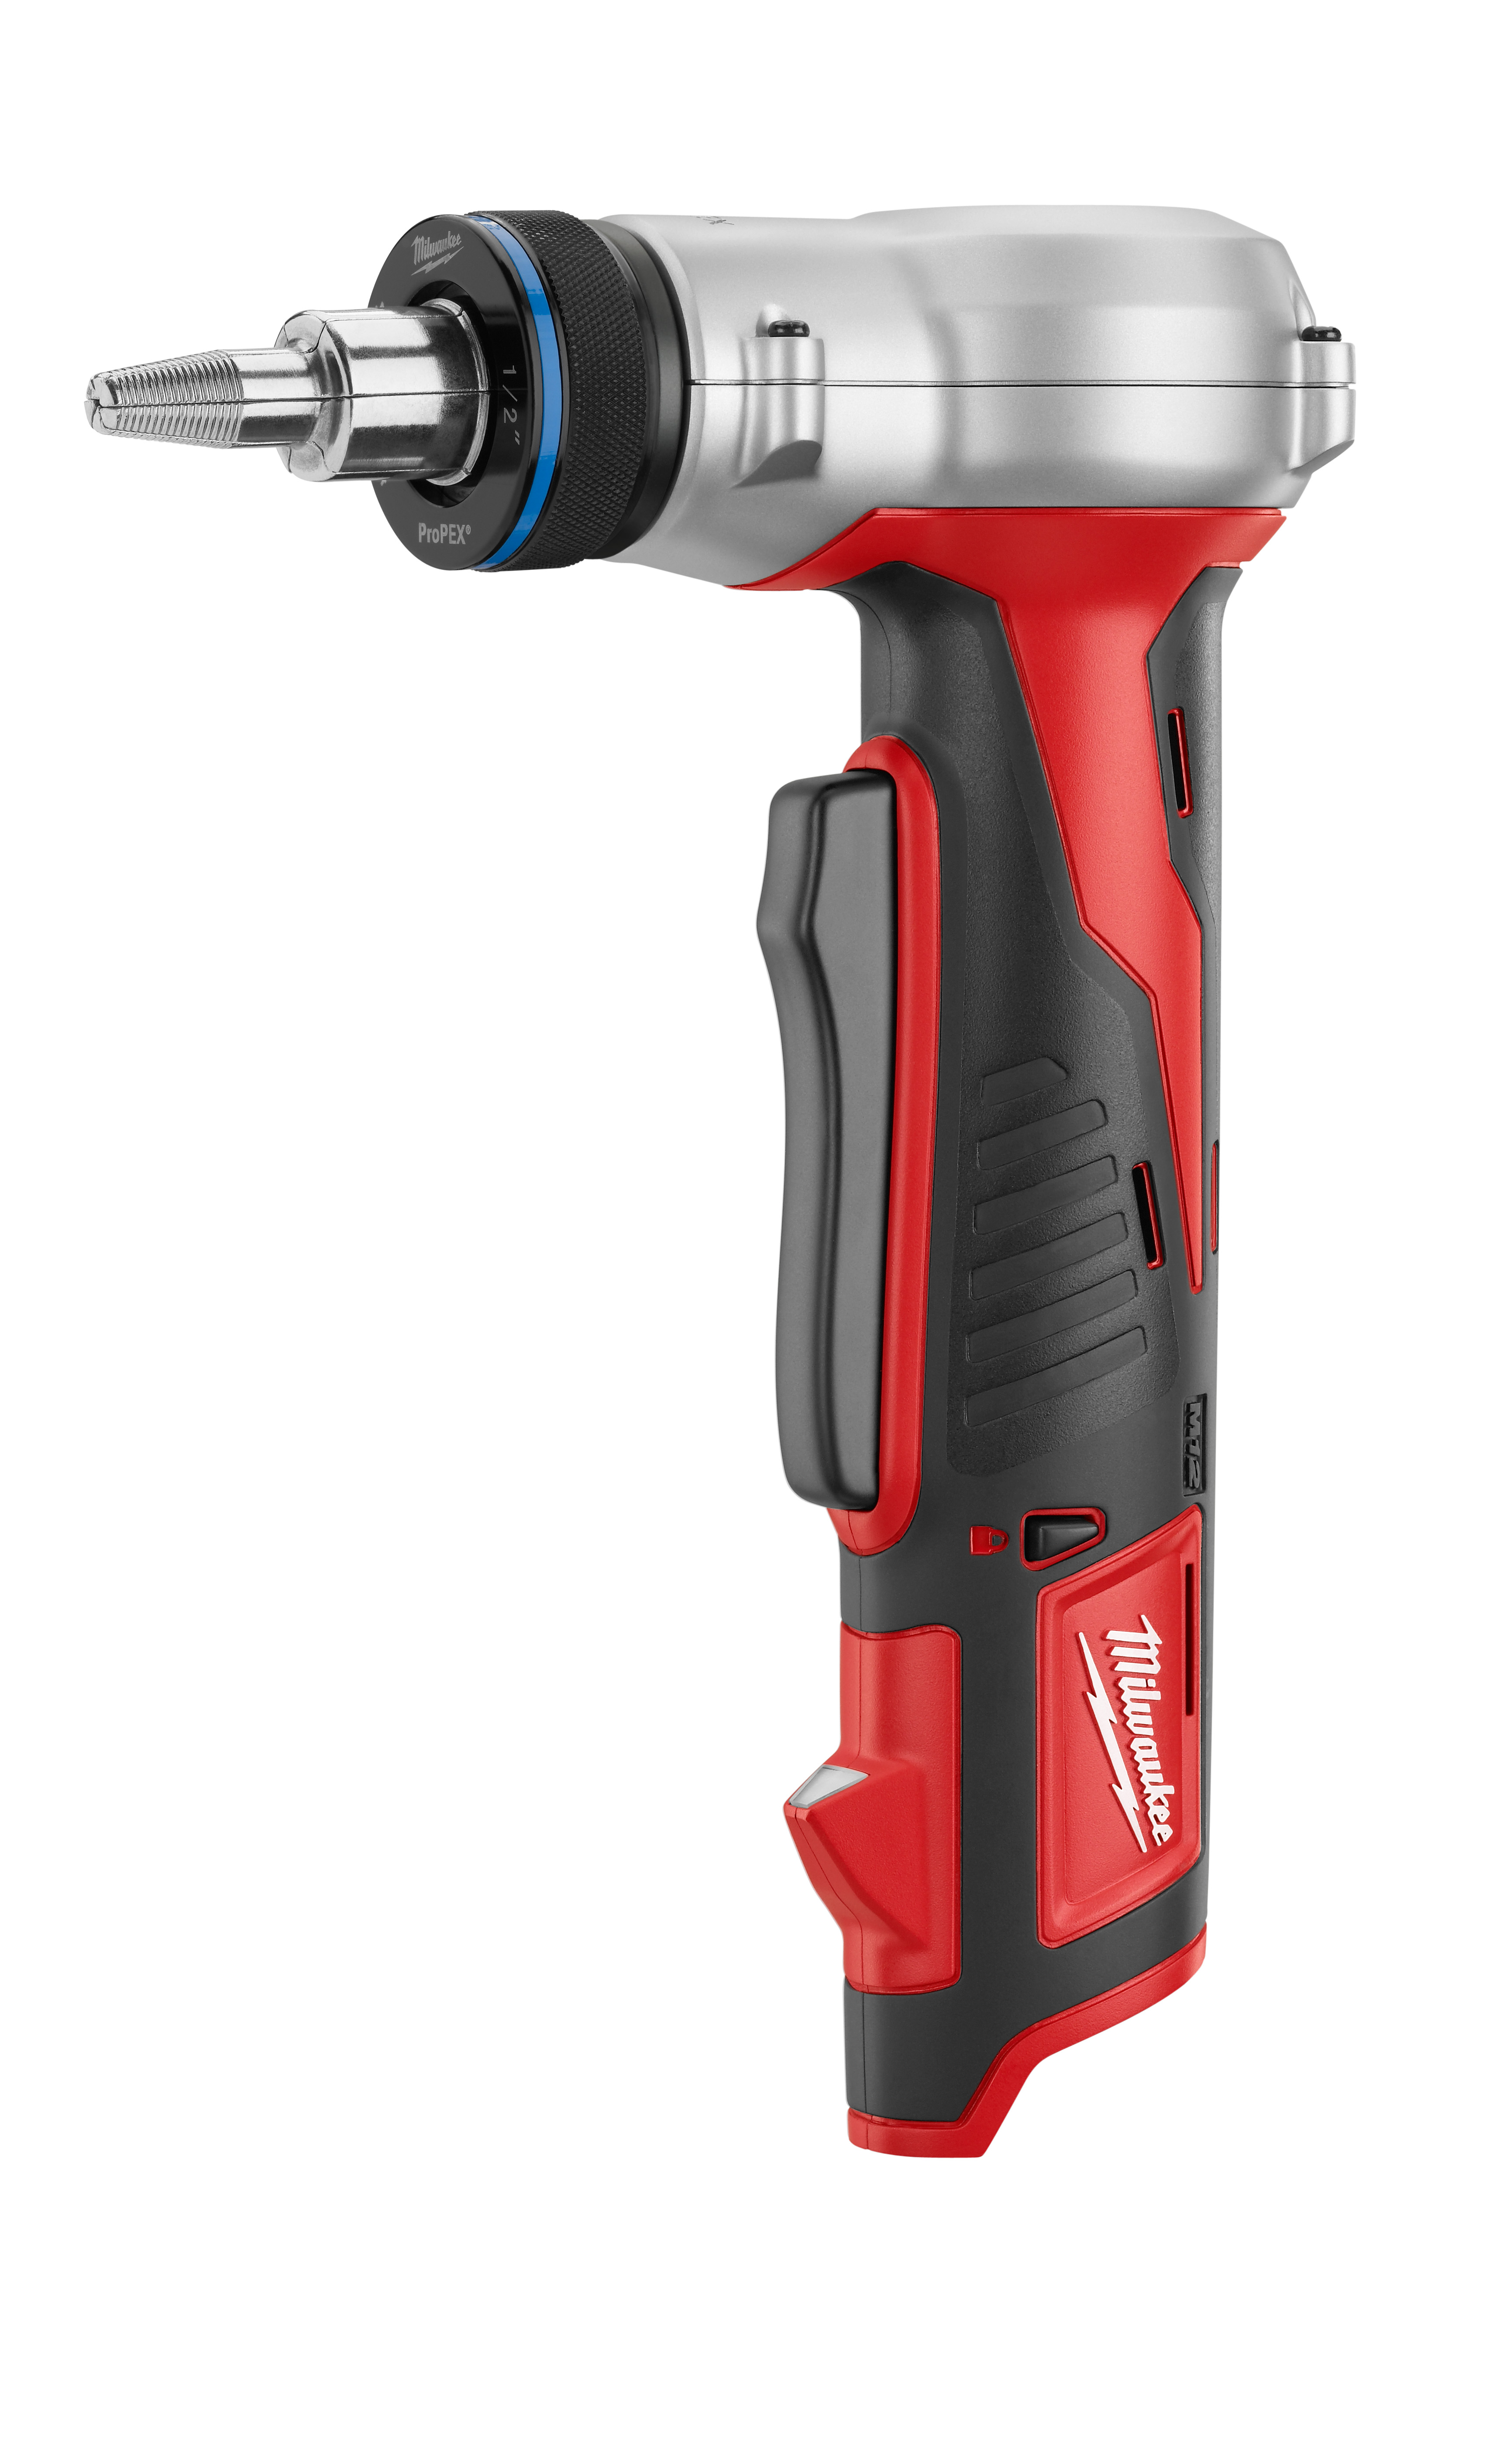 The M12™ cordless lithium-ion ProPEX® expansion tool features an auto-rotating head for convenient one-handed operation. A compact right angle design makes installing tubing in tight locations fast and easy, and the quick cam mechanism delivers precise, continuous expansion for 3/8 in. to 1 in. ProPEX® connections. Designed specifically for Uponor ProPEX®, the M12™ ProPEX® expansion tool is built to make effortless installations faster than other tools available. Learn more about Uponor, Inc and the ProPEX® system.